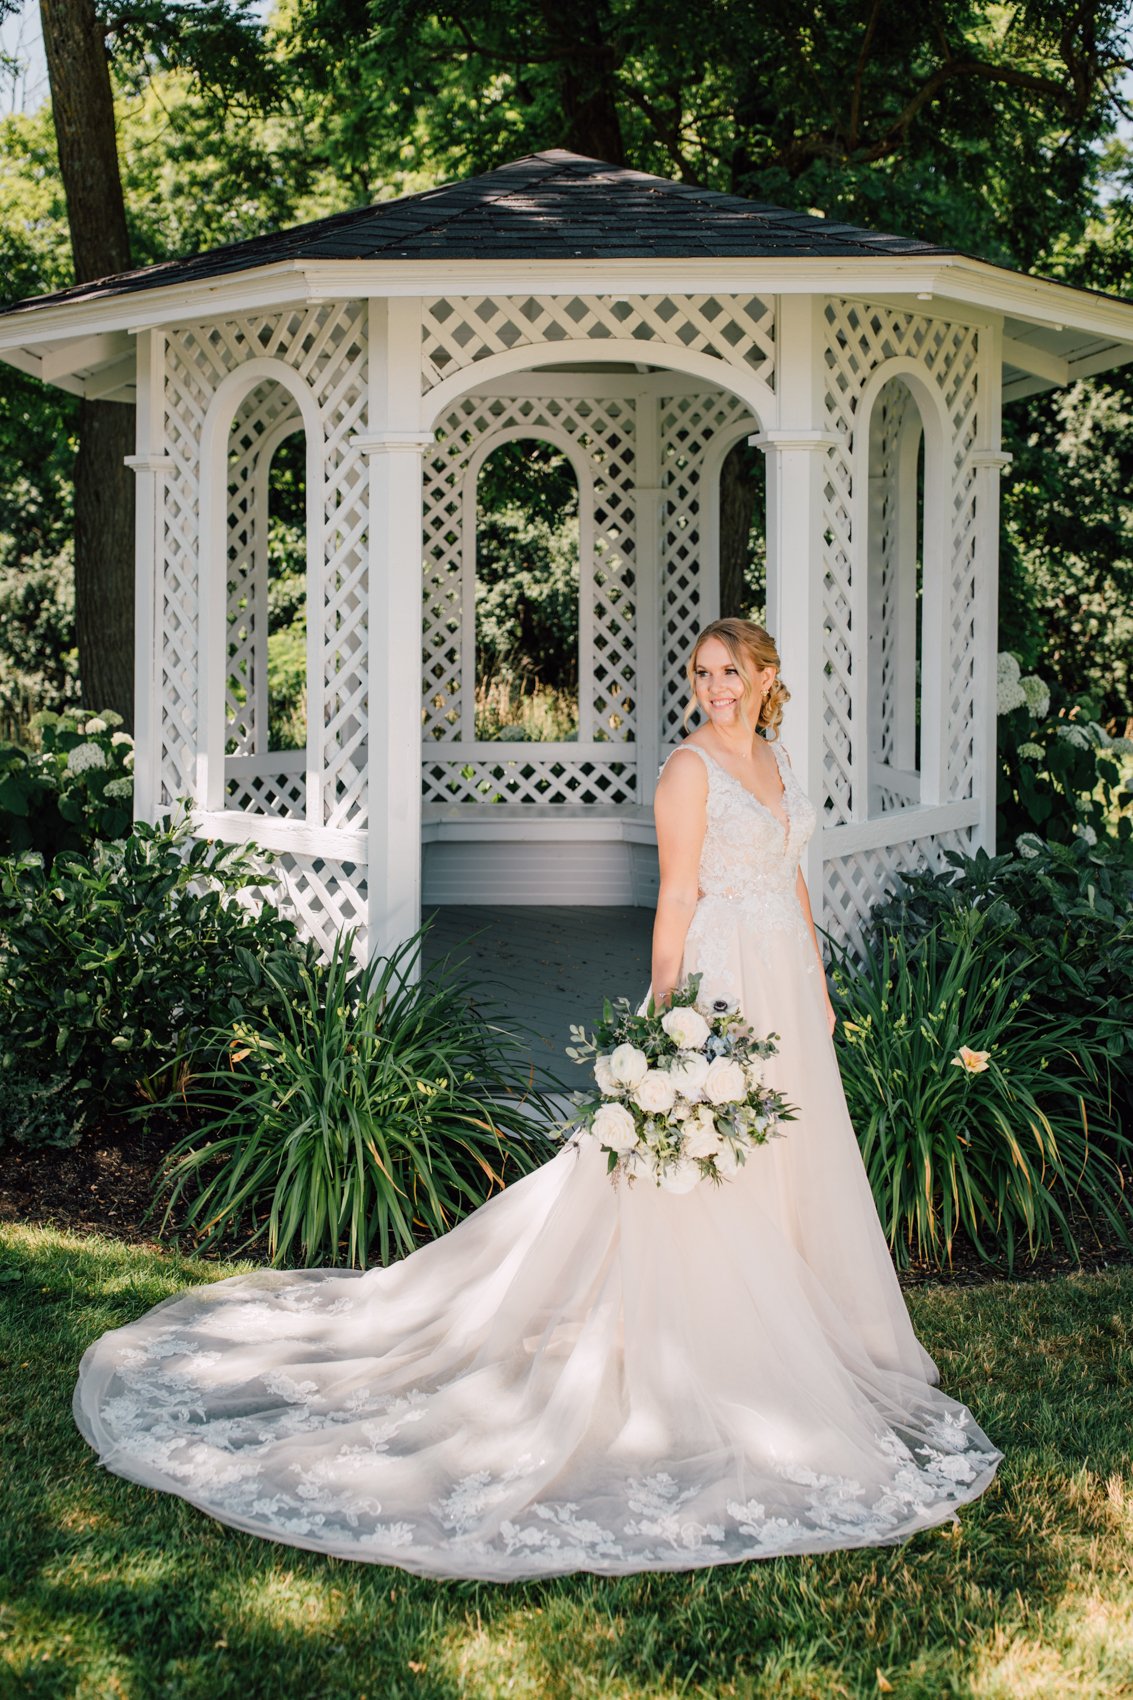  Bridal portrait in front of a white gazebo at Windridge Estate Red Barn in Central NY as the Bride wears a tulle dress with lace applique and holds a bouquet of white roses and greenery 